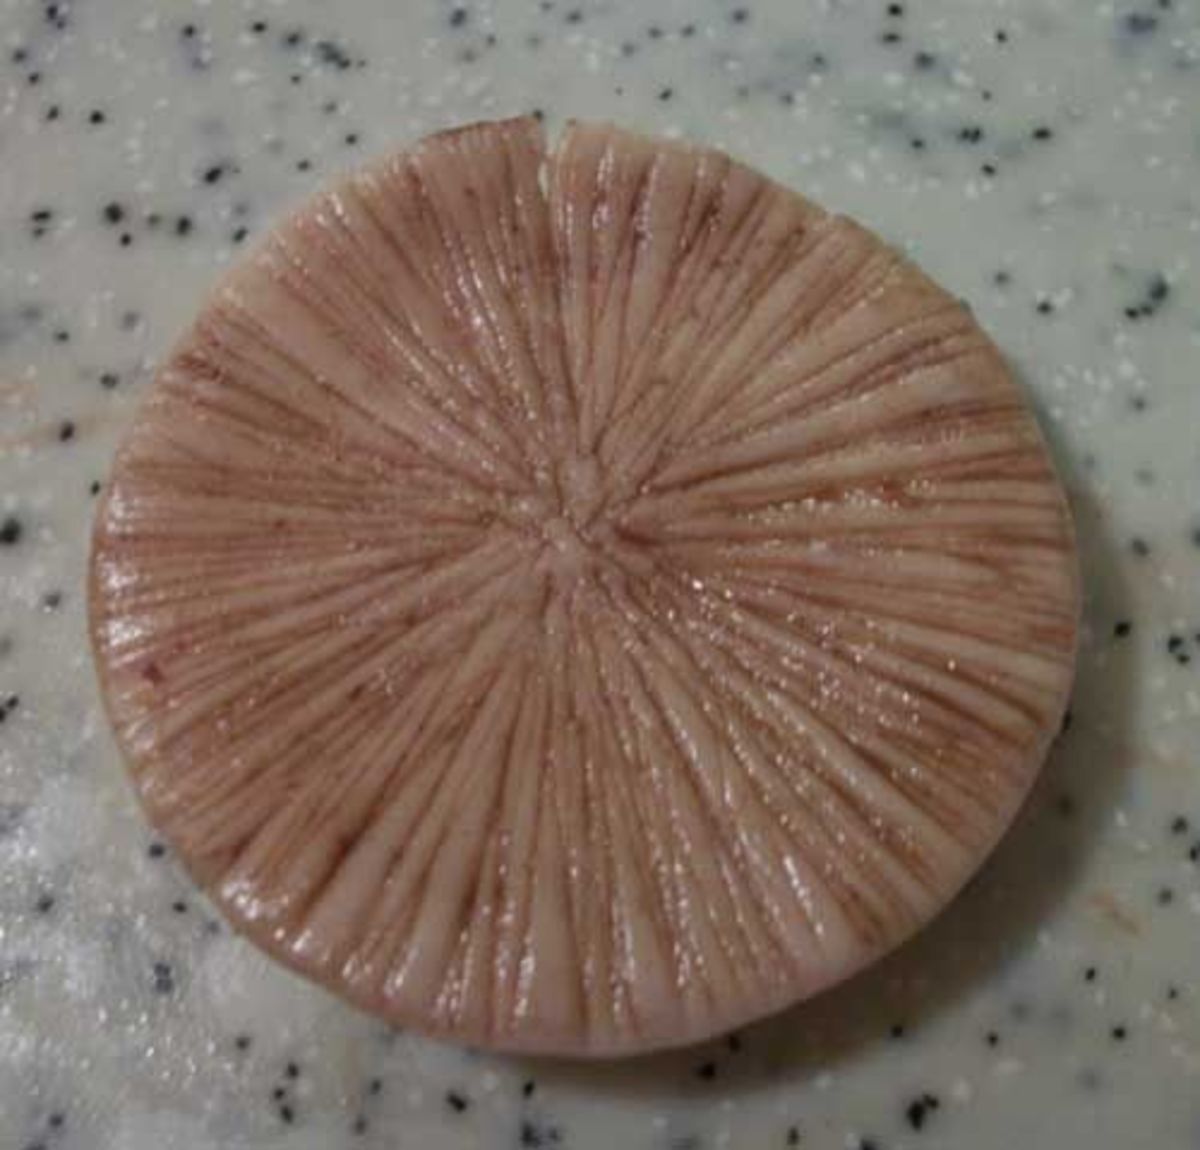 Brush cocoa powder water into the score marks. Set the piece aside. This will be the gills under the mushroom’s cap.